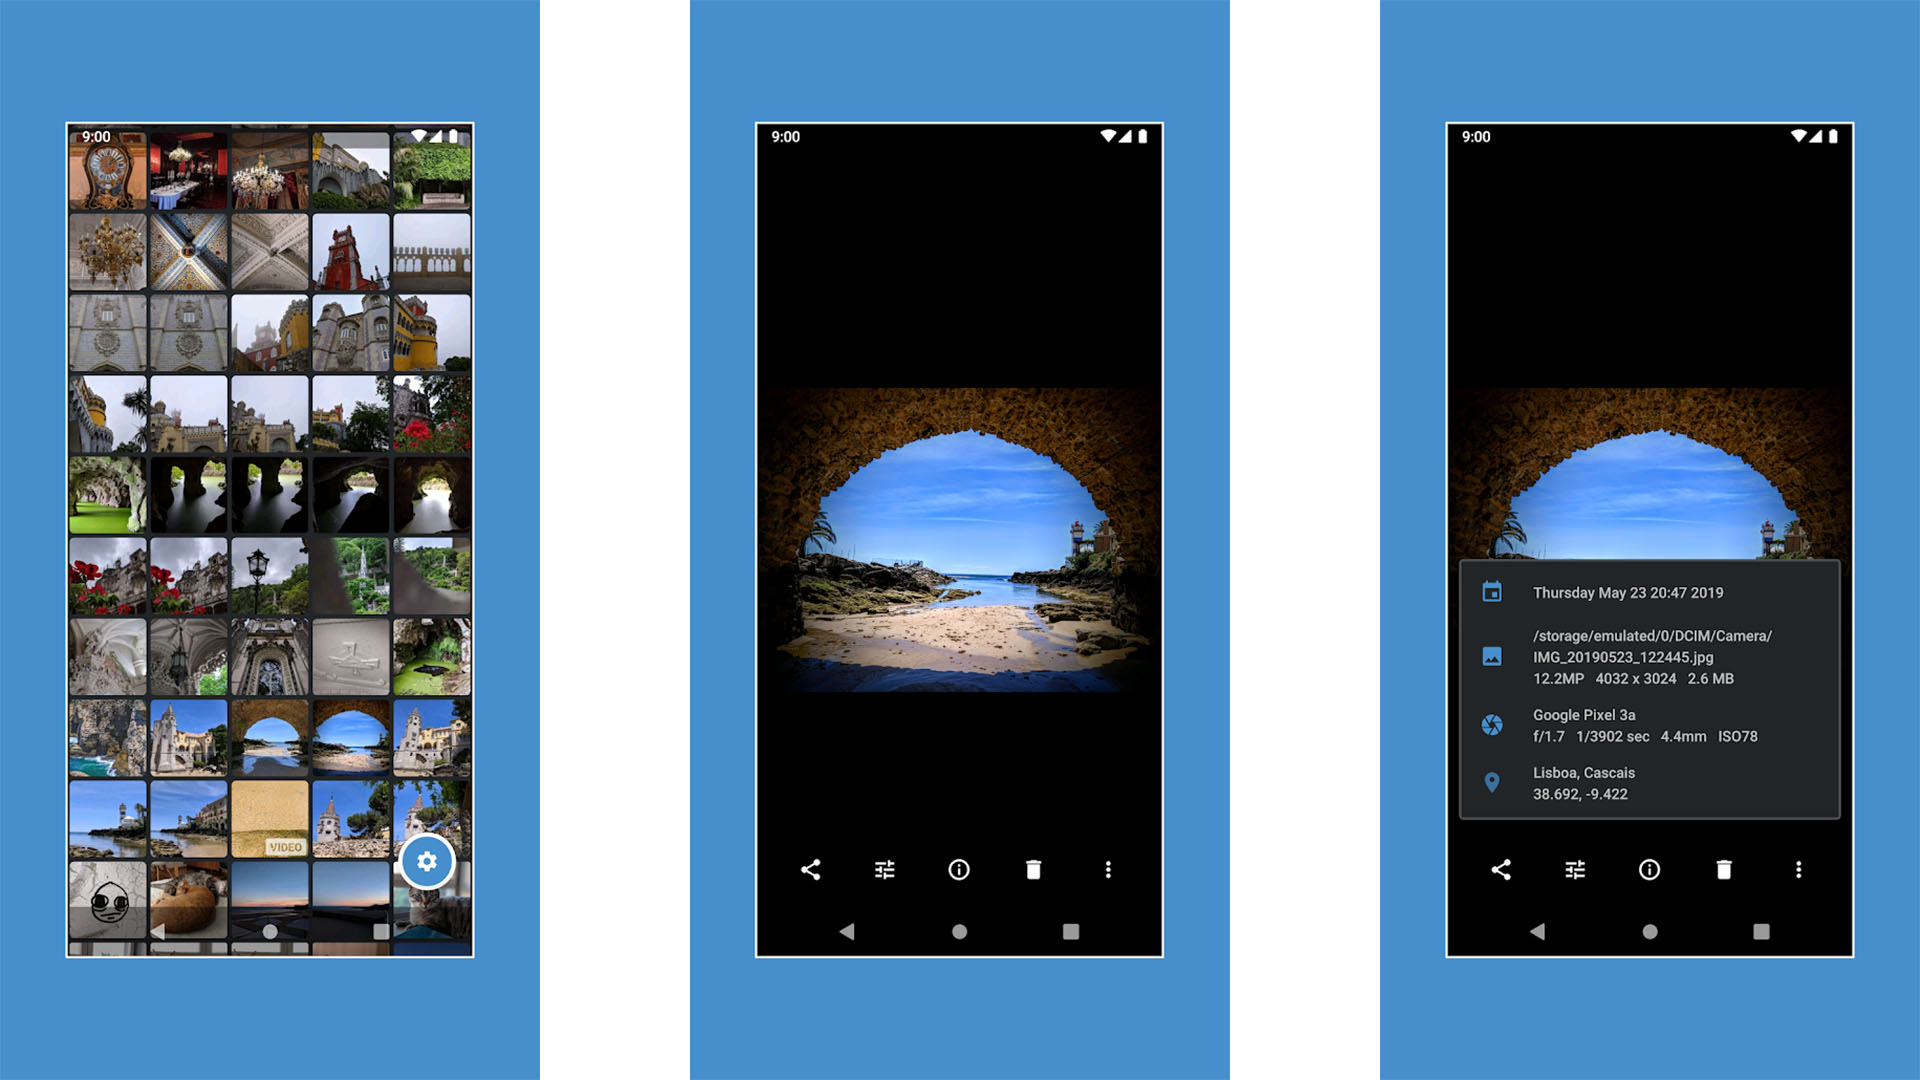 Focus Go screenshot 2019 - best gallery apps for android